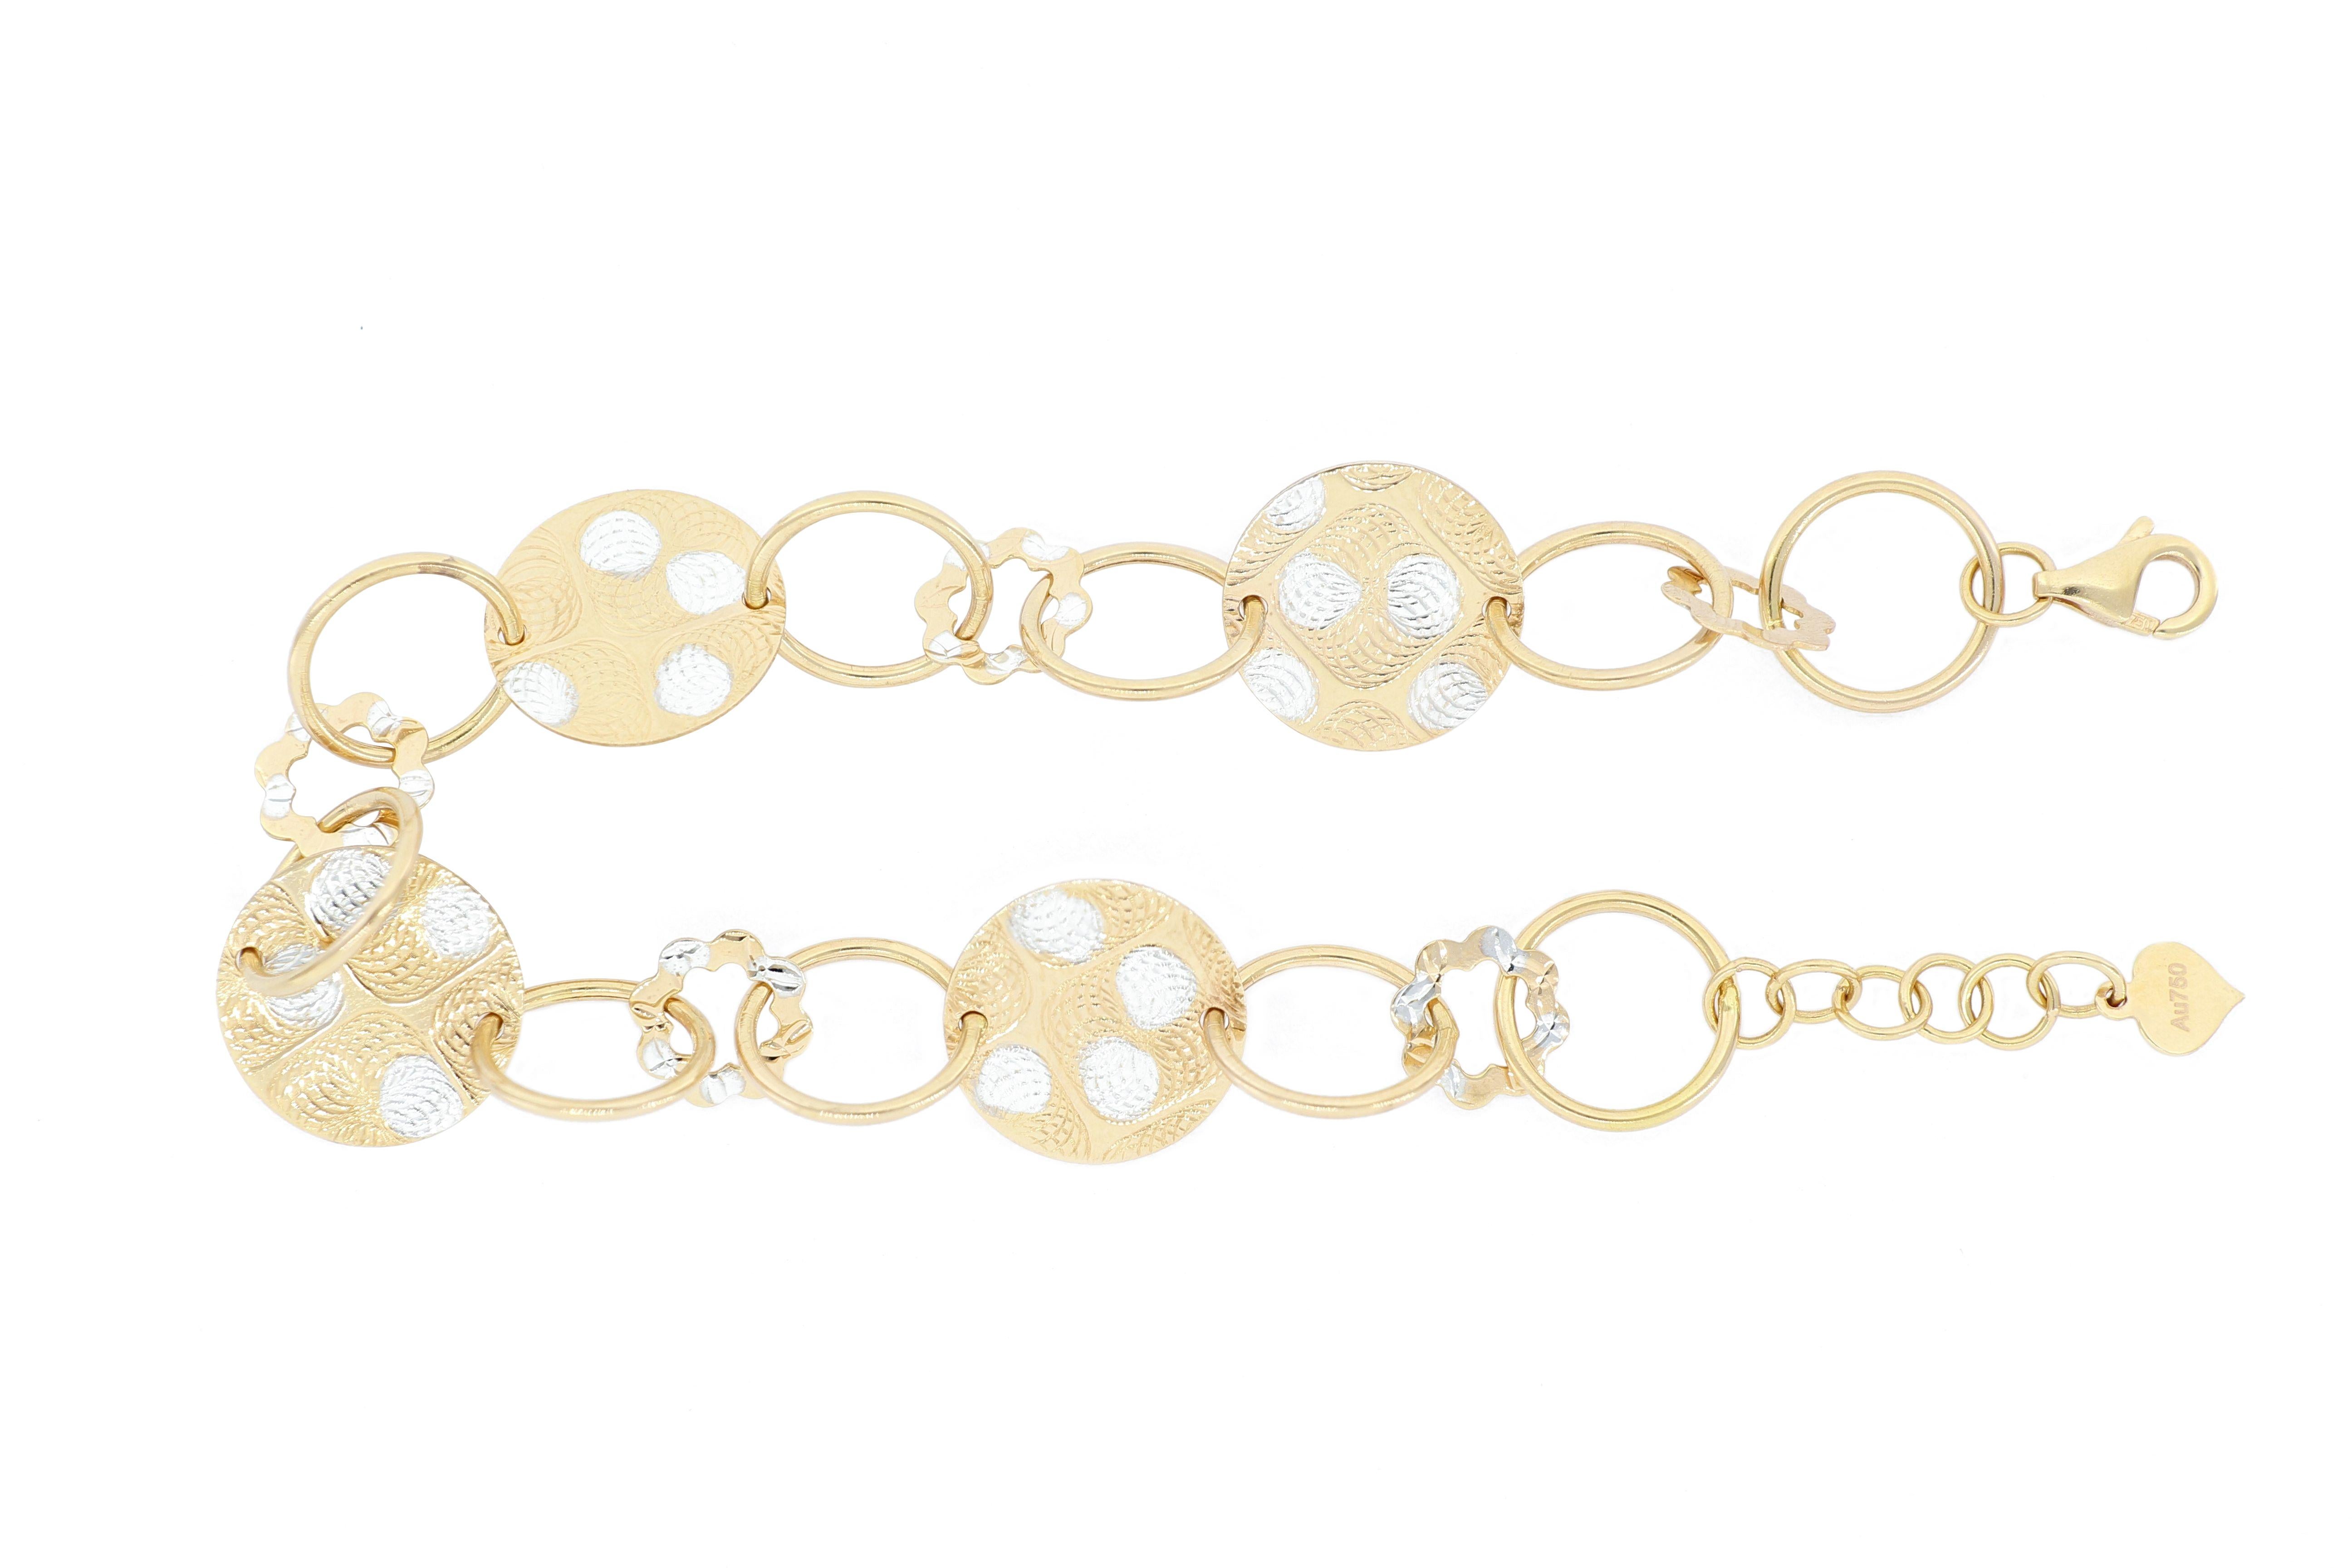 This beautiful 18K gold bracelet is designed and made in Italy, featuring tri-colour laser-cut pattern,  it can be matched with casual wear of different style.
The company is renowned for its high jewellery collections with fabulous designs. Our